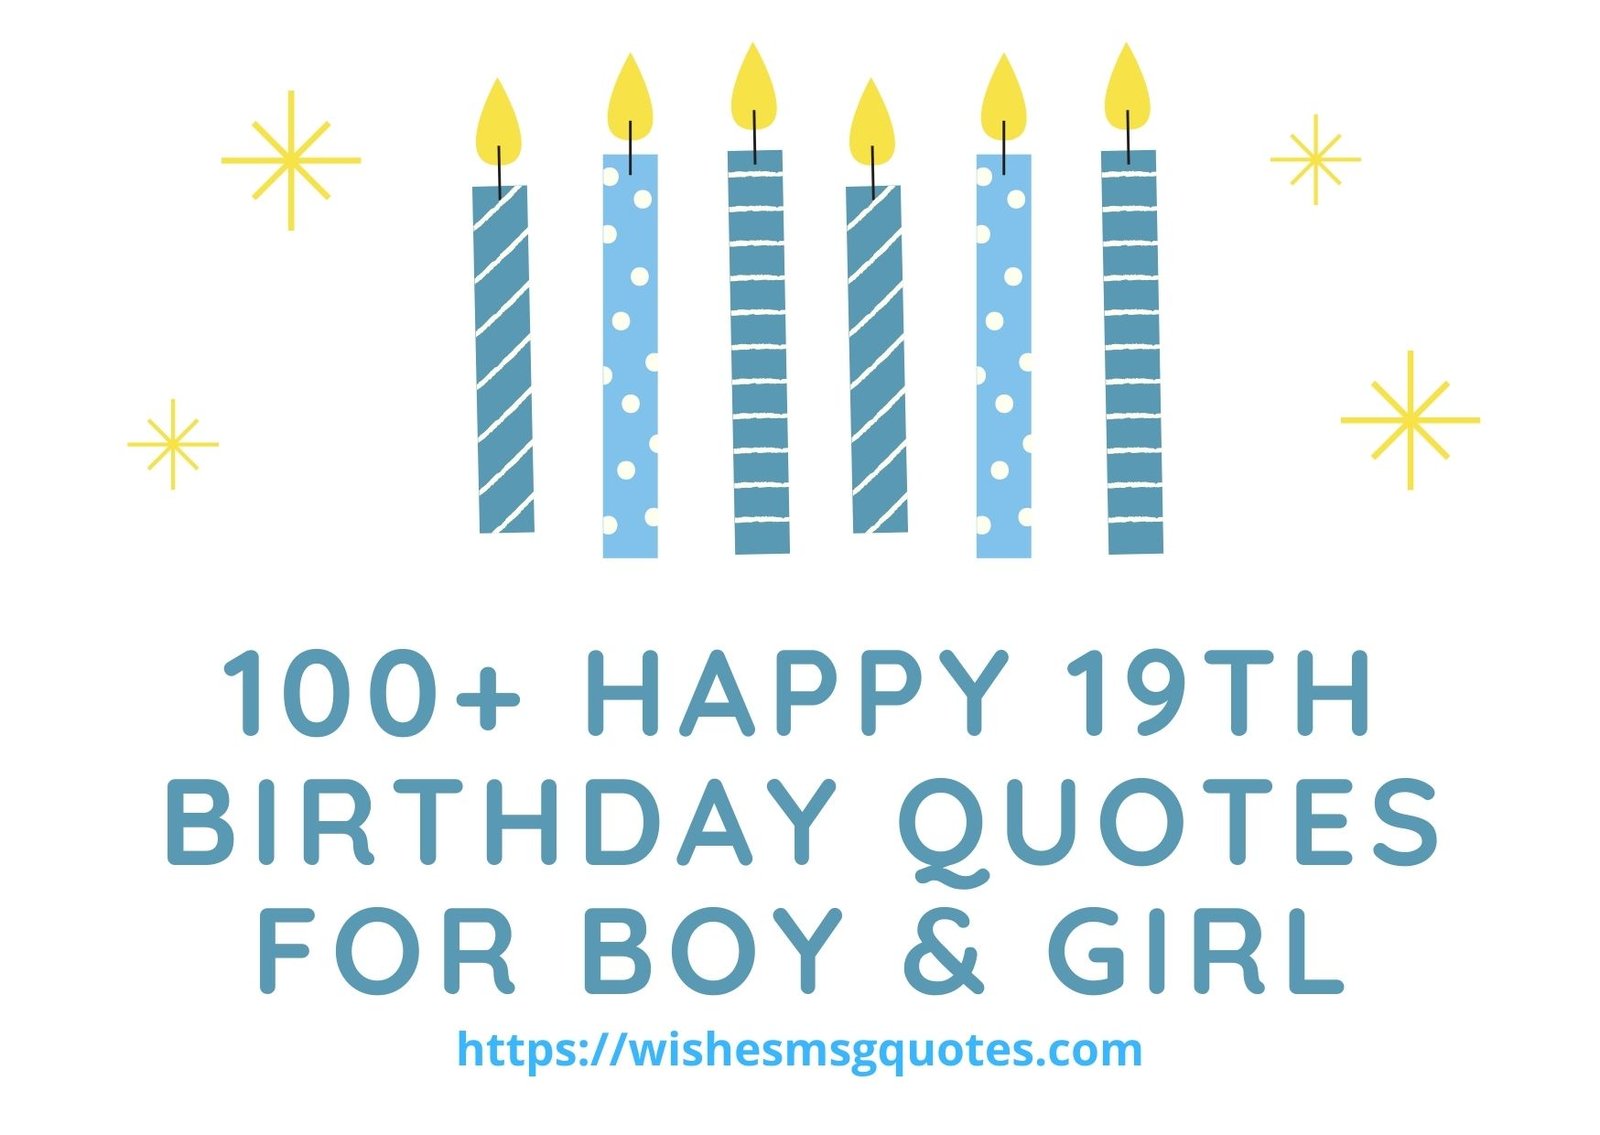 Top 100+ Happy 19th Birthday Quotes For Boy And Girl